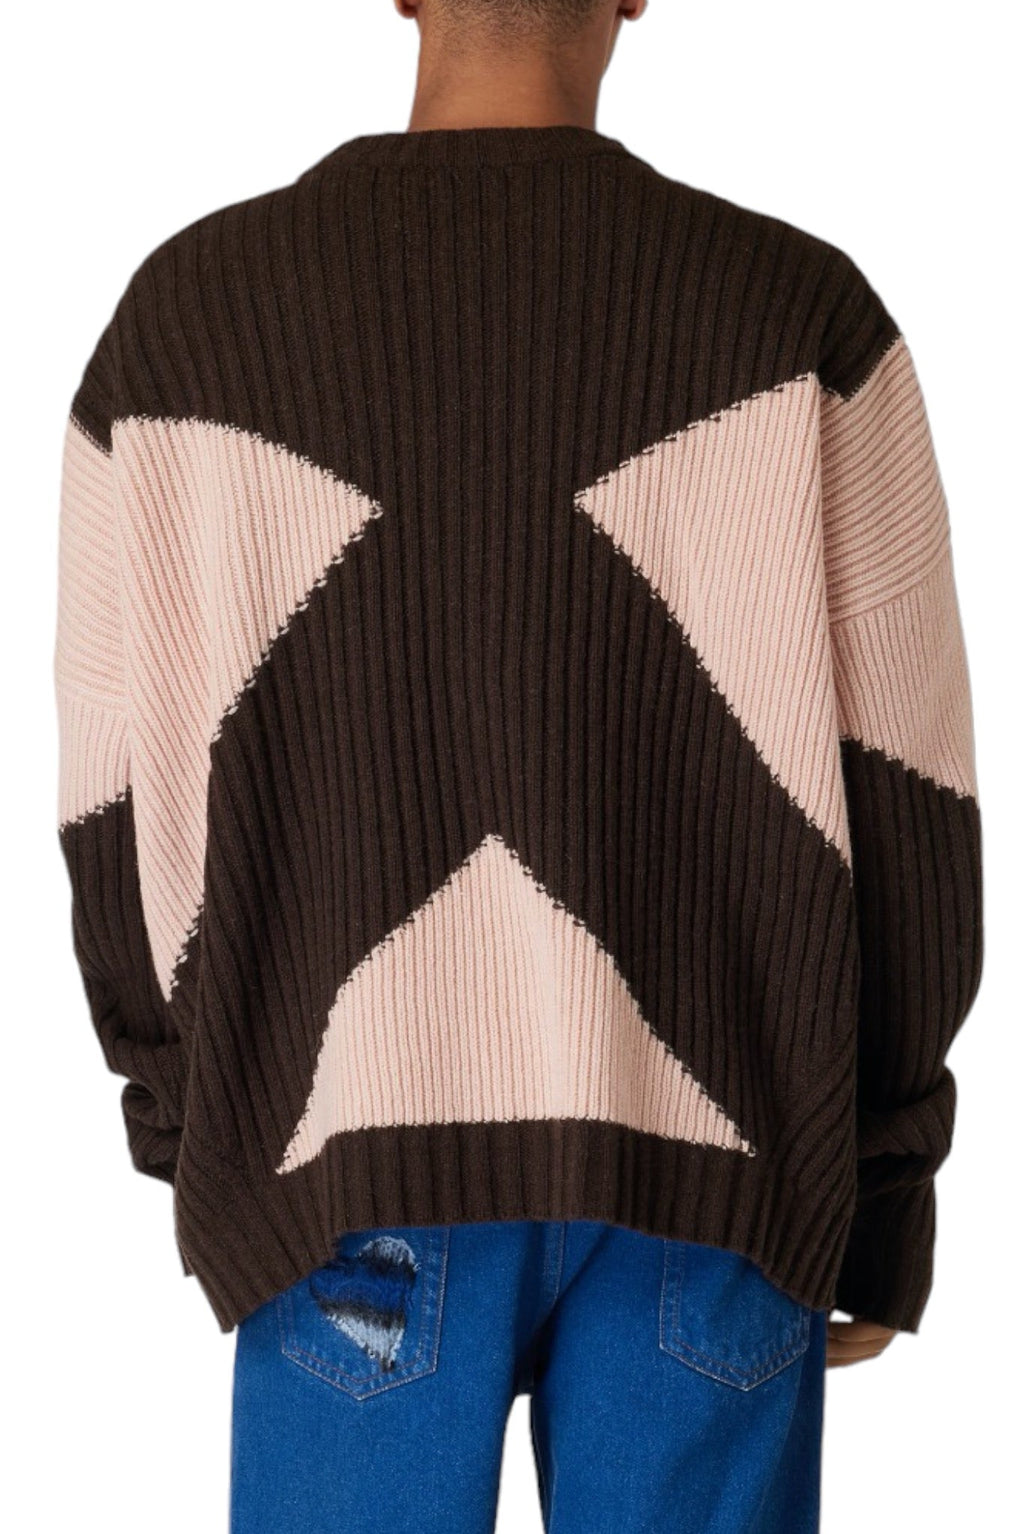 GmbH Rahil Knitted Unisex Color Blocked Jumper